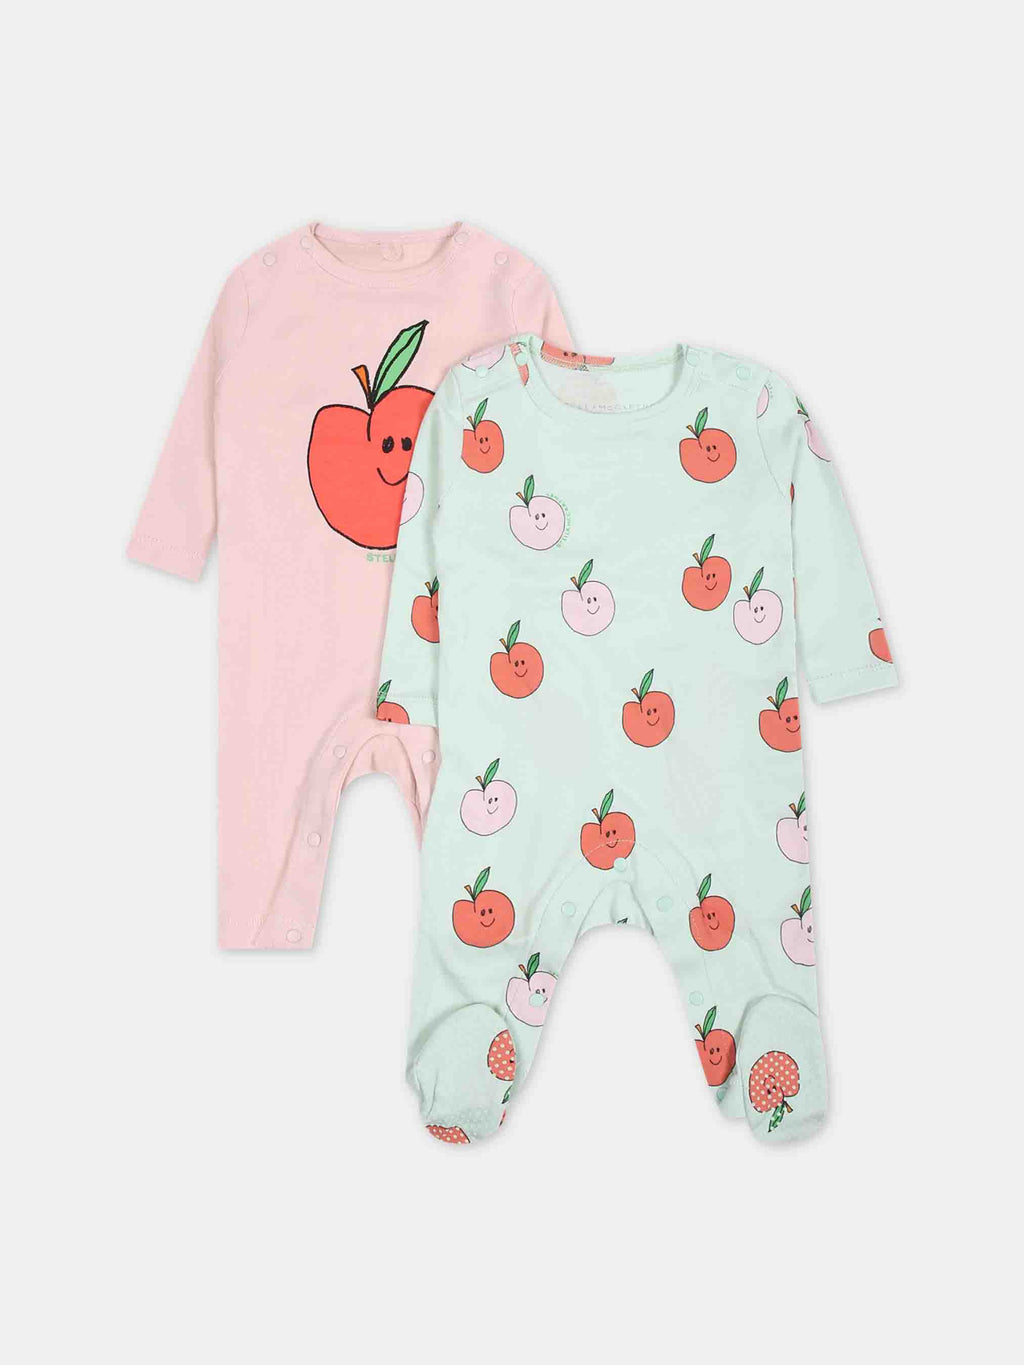 Multicolor set for baby girl with apple